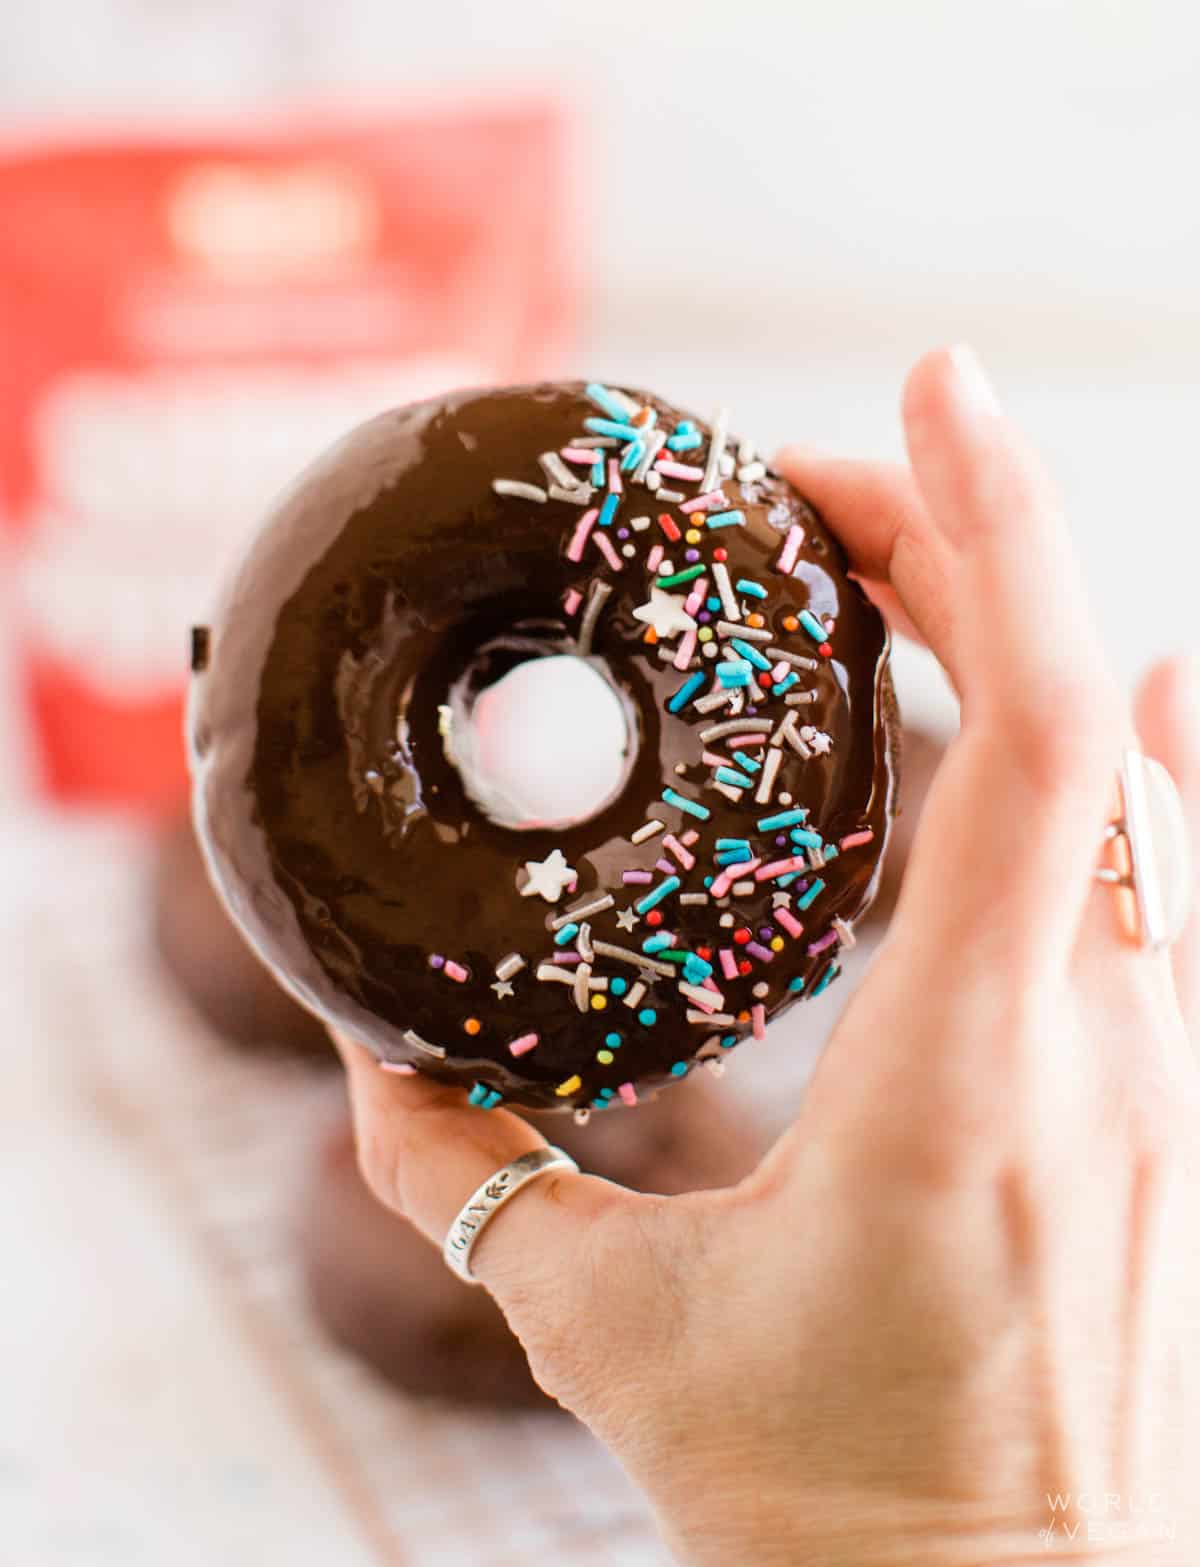 Holding up a vegan chocolate donut with sprinkles.